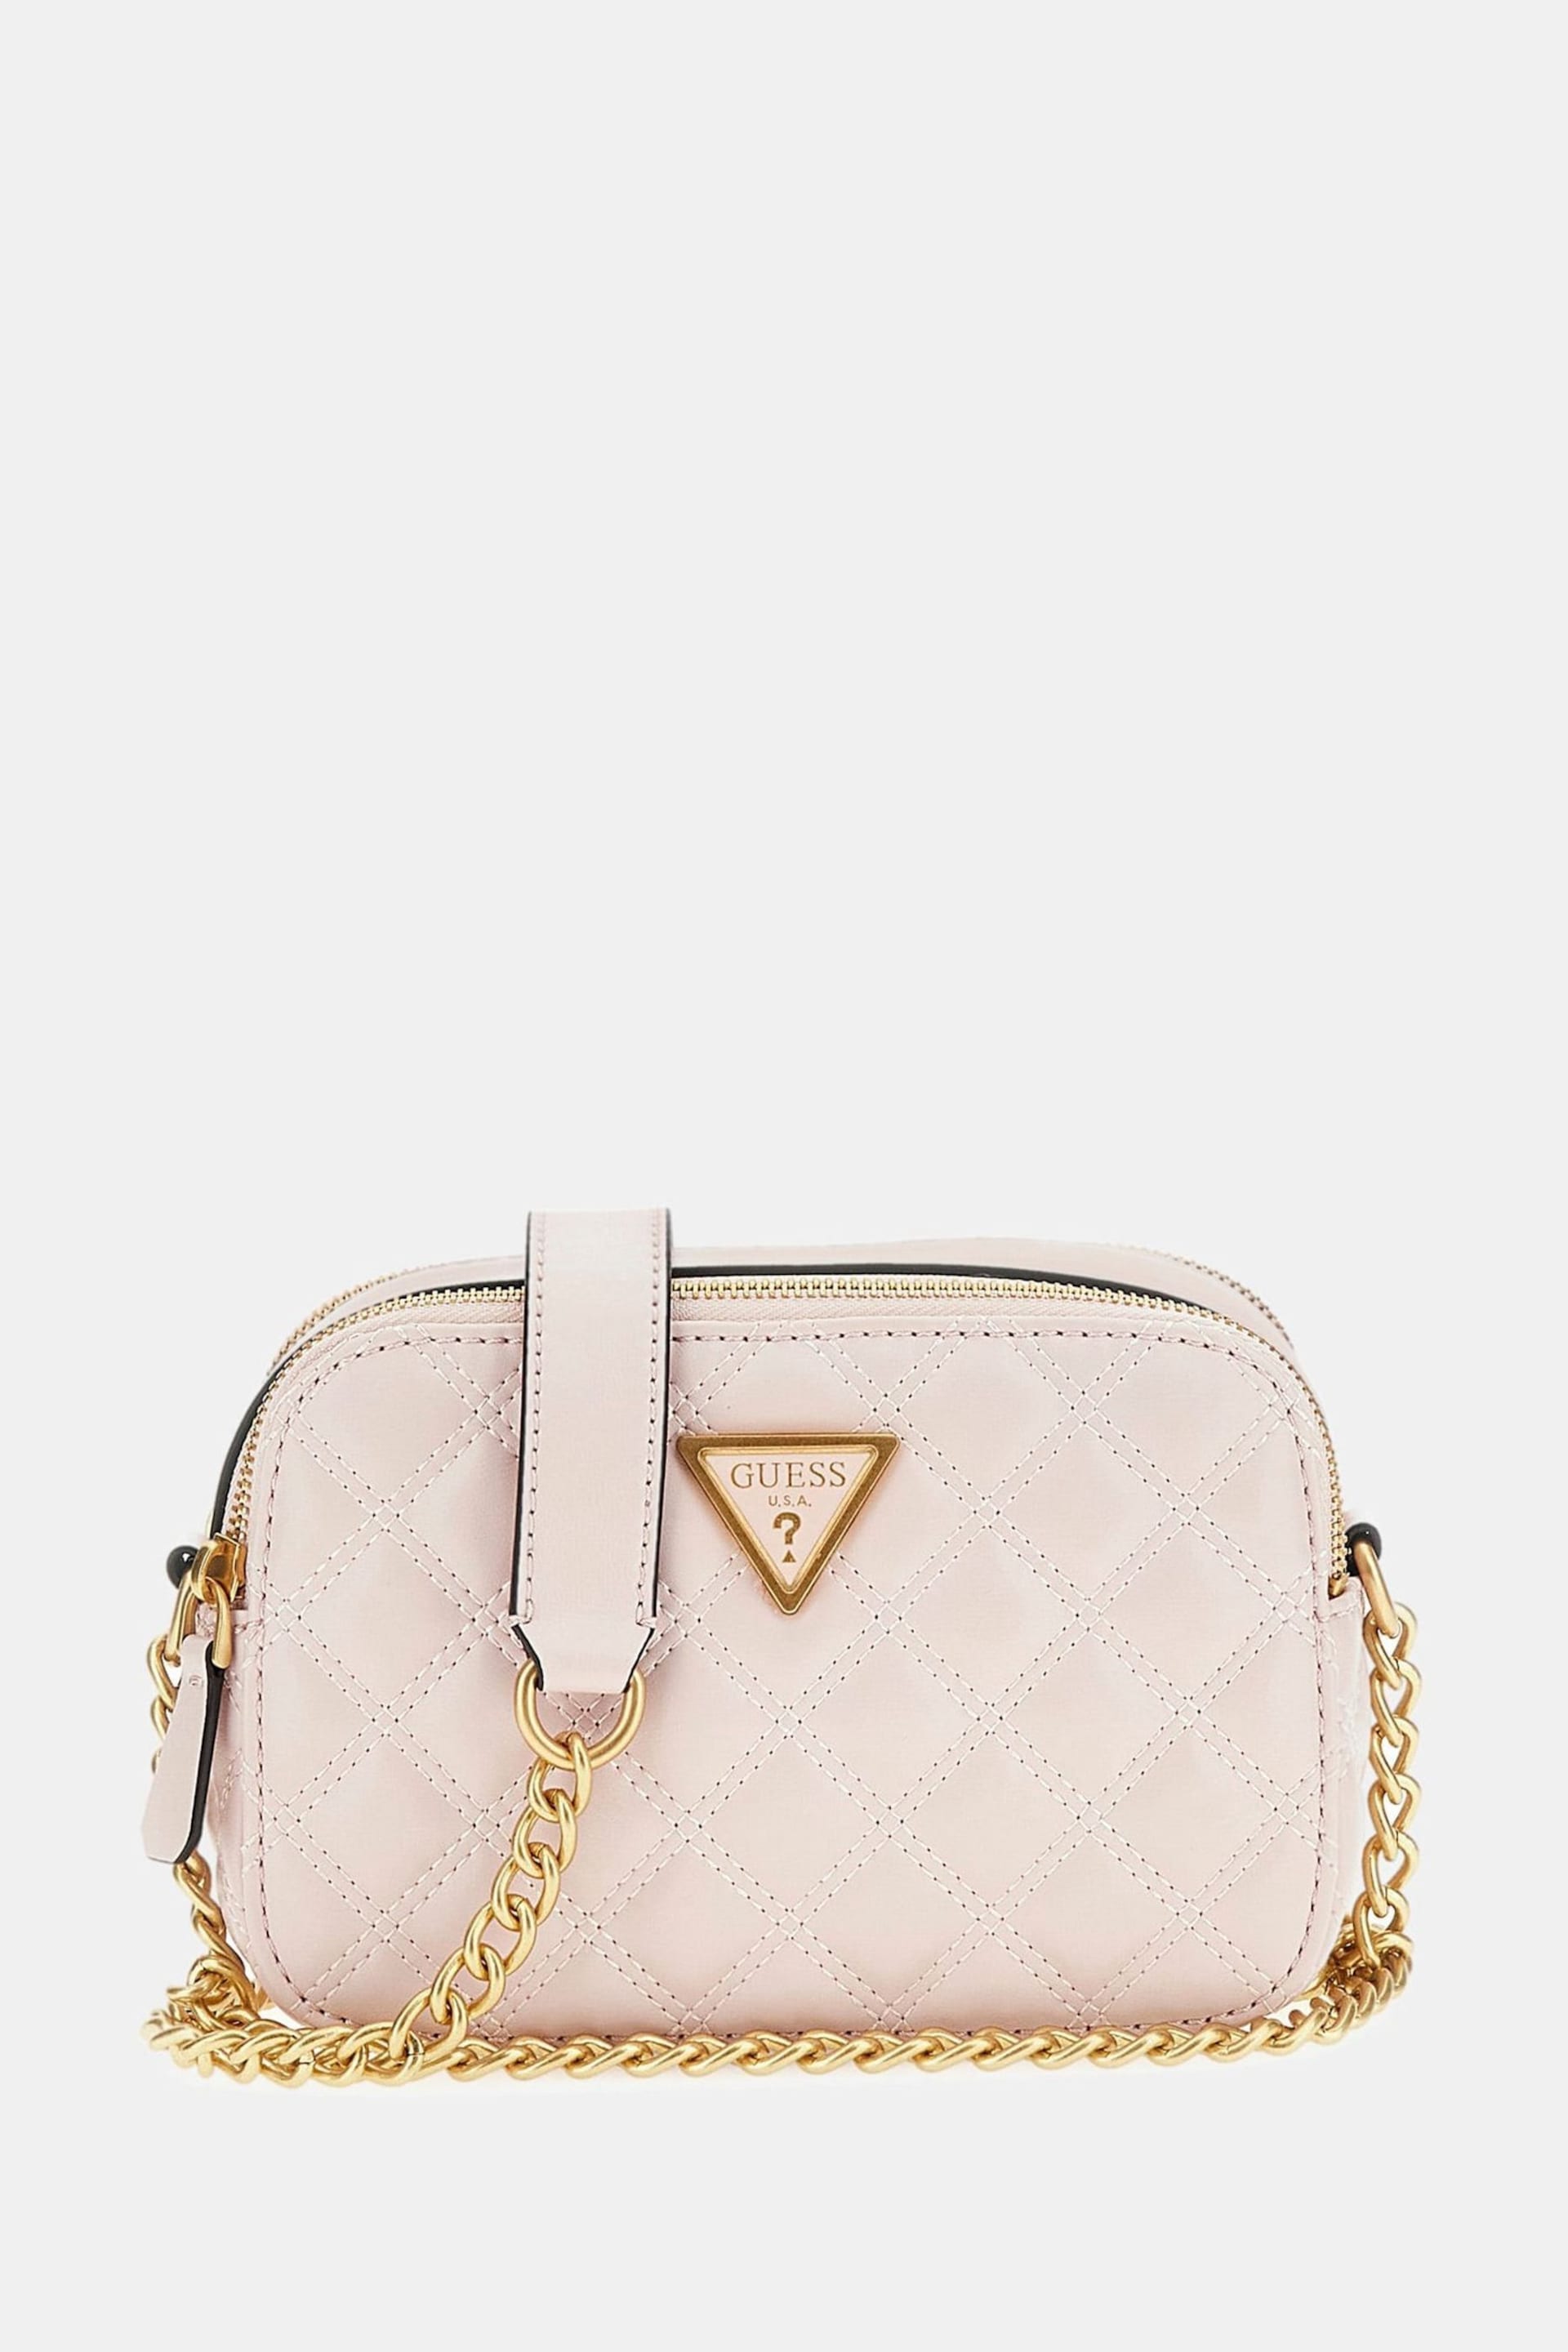 GUESS Giully Quilted Camera Bag - Image 4 of 6